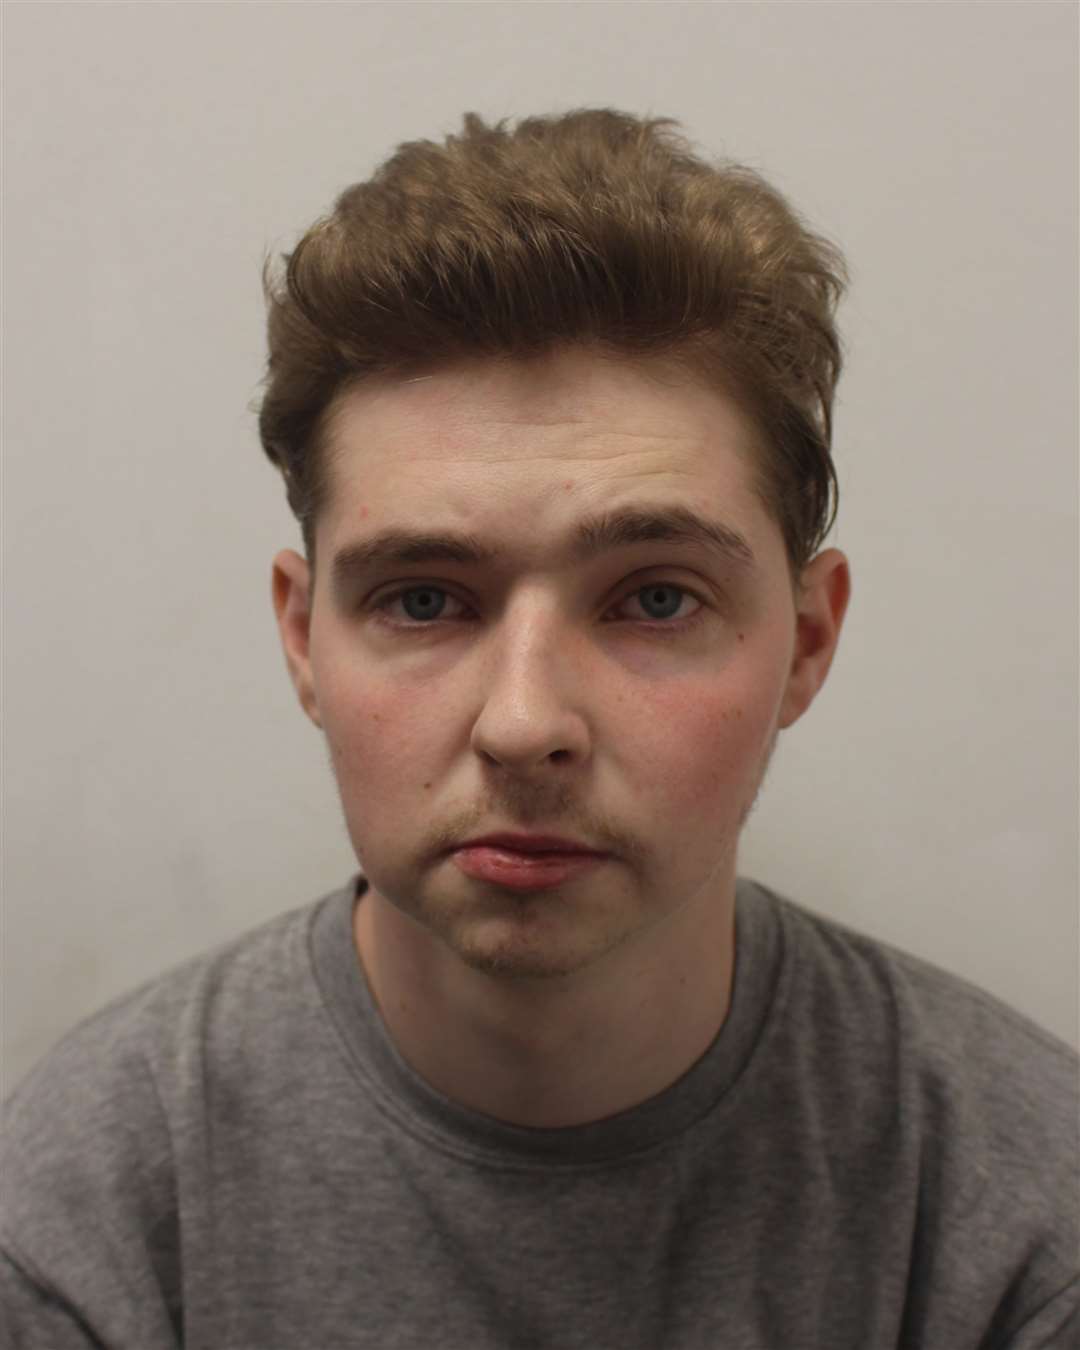 James Bainbridge of Harslock Drive, Abbey Wood in Bexley, has been jailed for child sex offences. Picture: Met Police